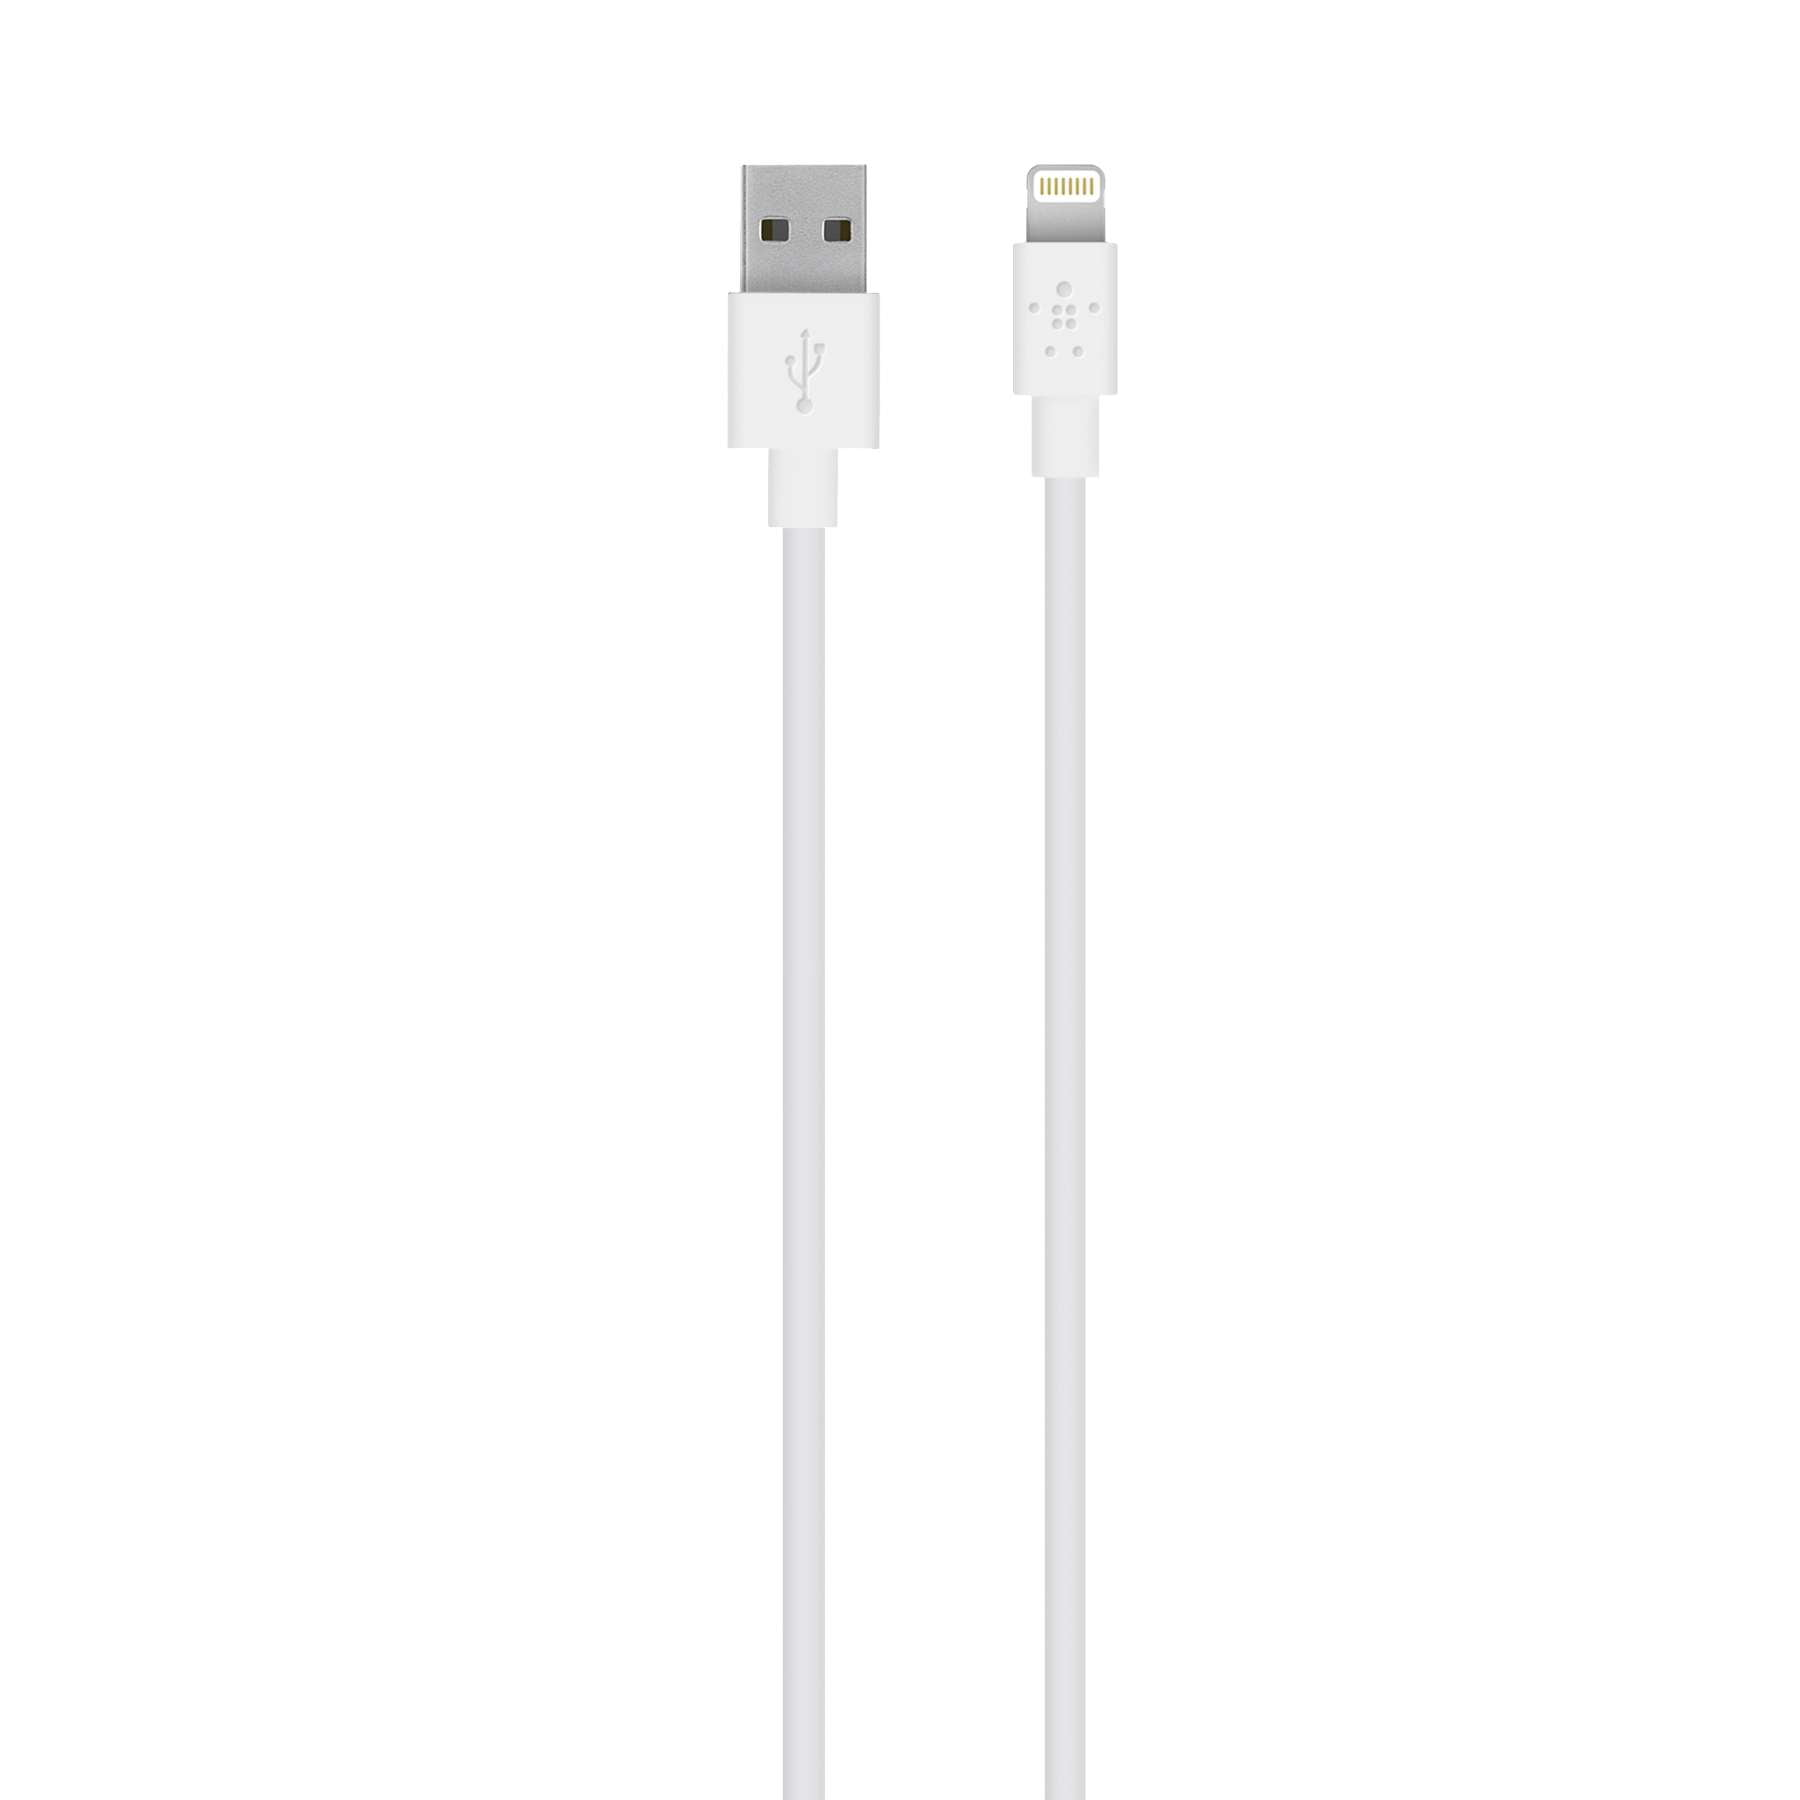 Cable Lightning a USB-A 3.0 Mt Belkin blanco